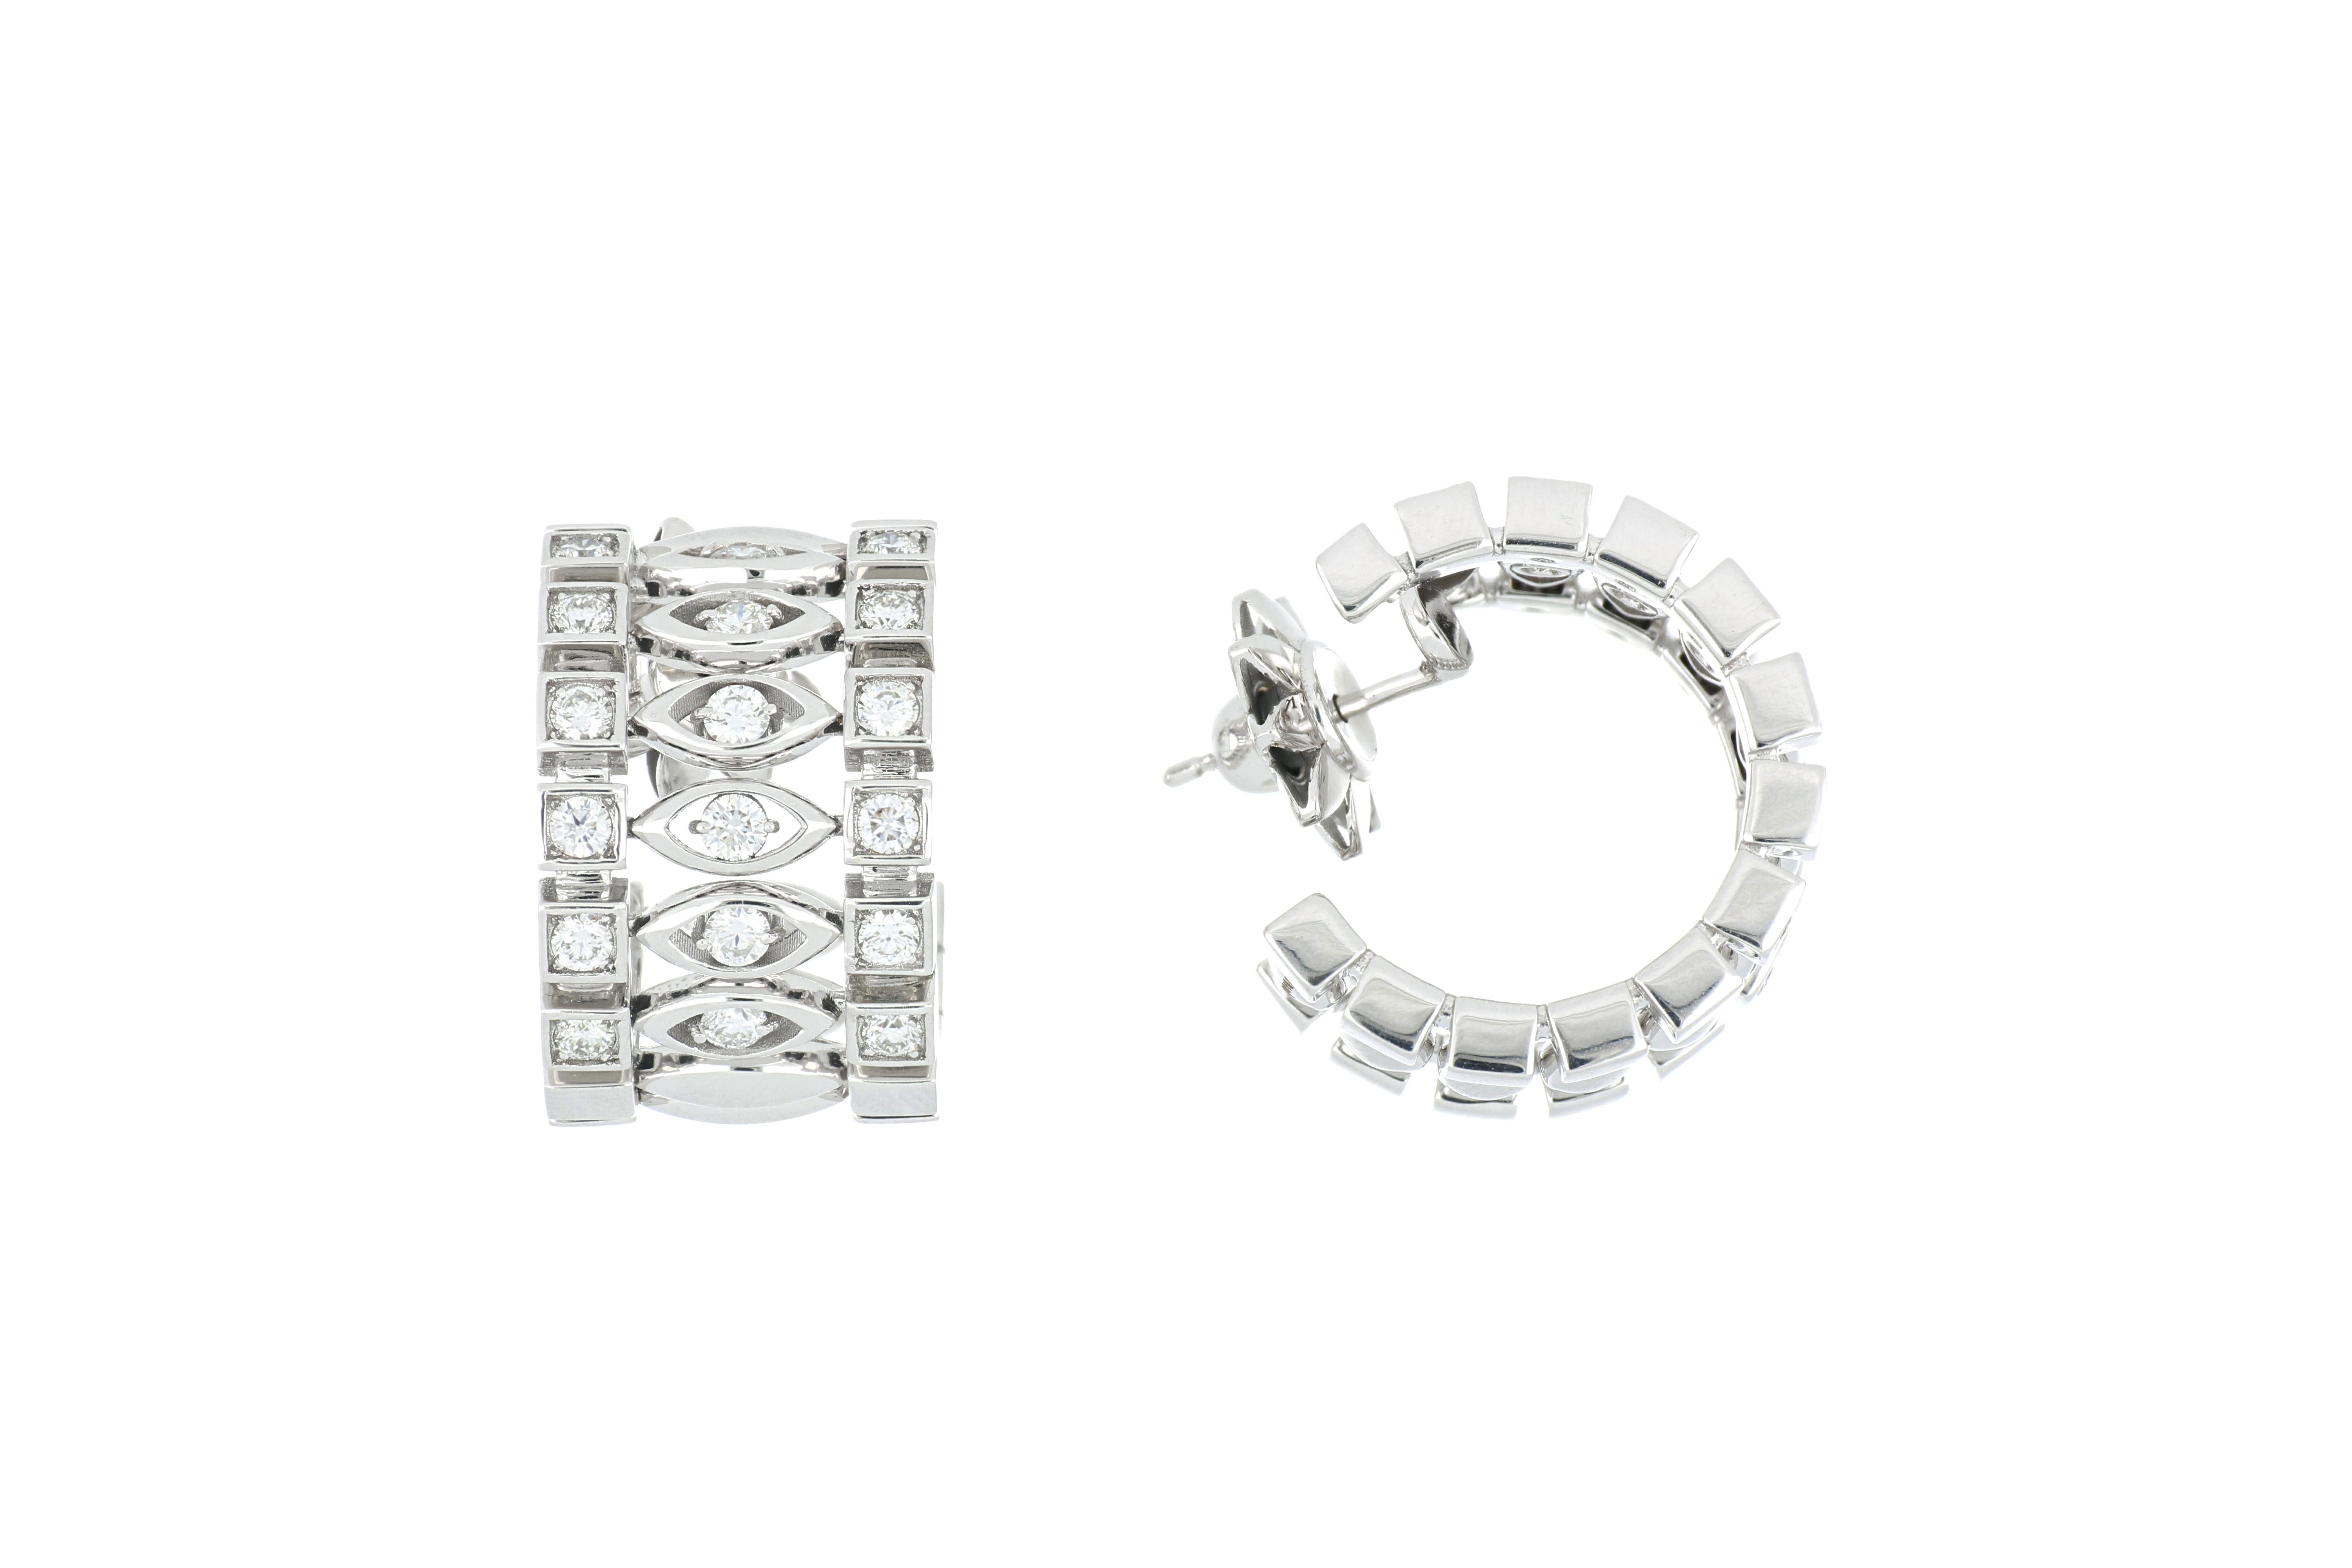 Inspired by the strong, bold, and compelling Greta Garbo, these earrings are elegant and stunning. These phenomenal earrings have a beautiful pattern of soft, curved elongated ovals and bold, strong squares. These radiant 18k white gold earrings are